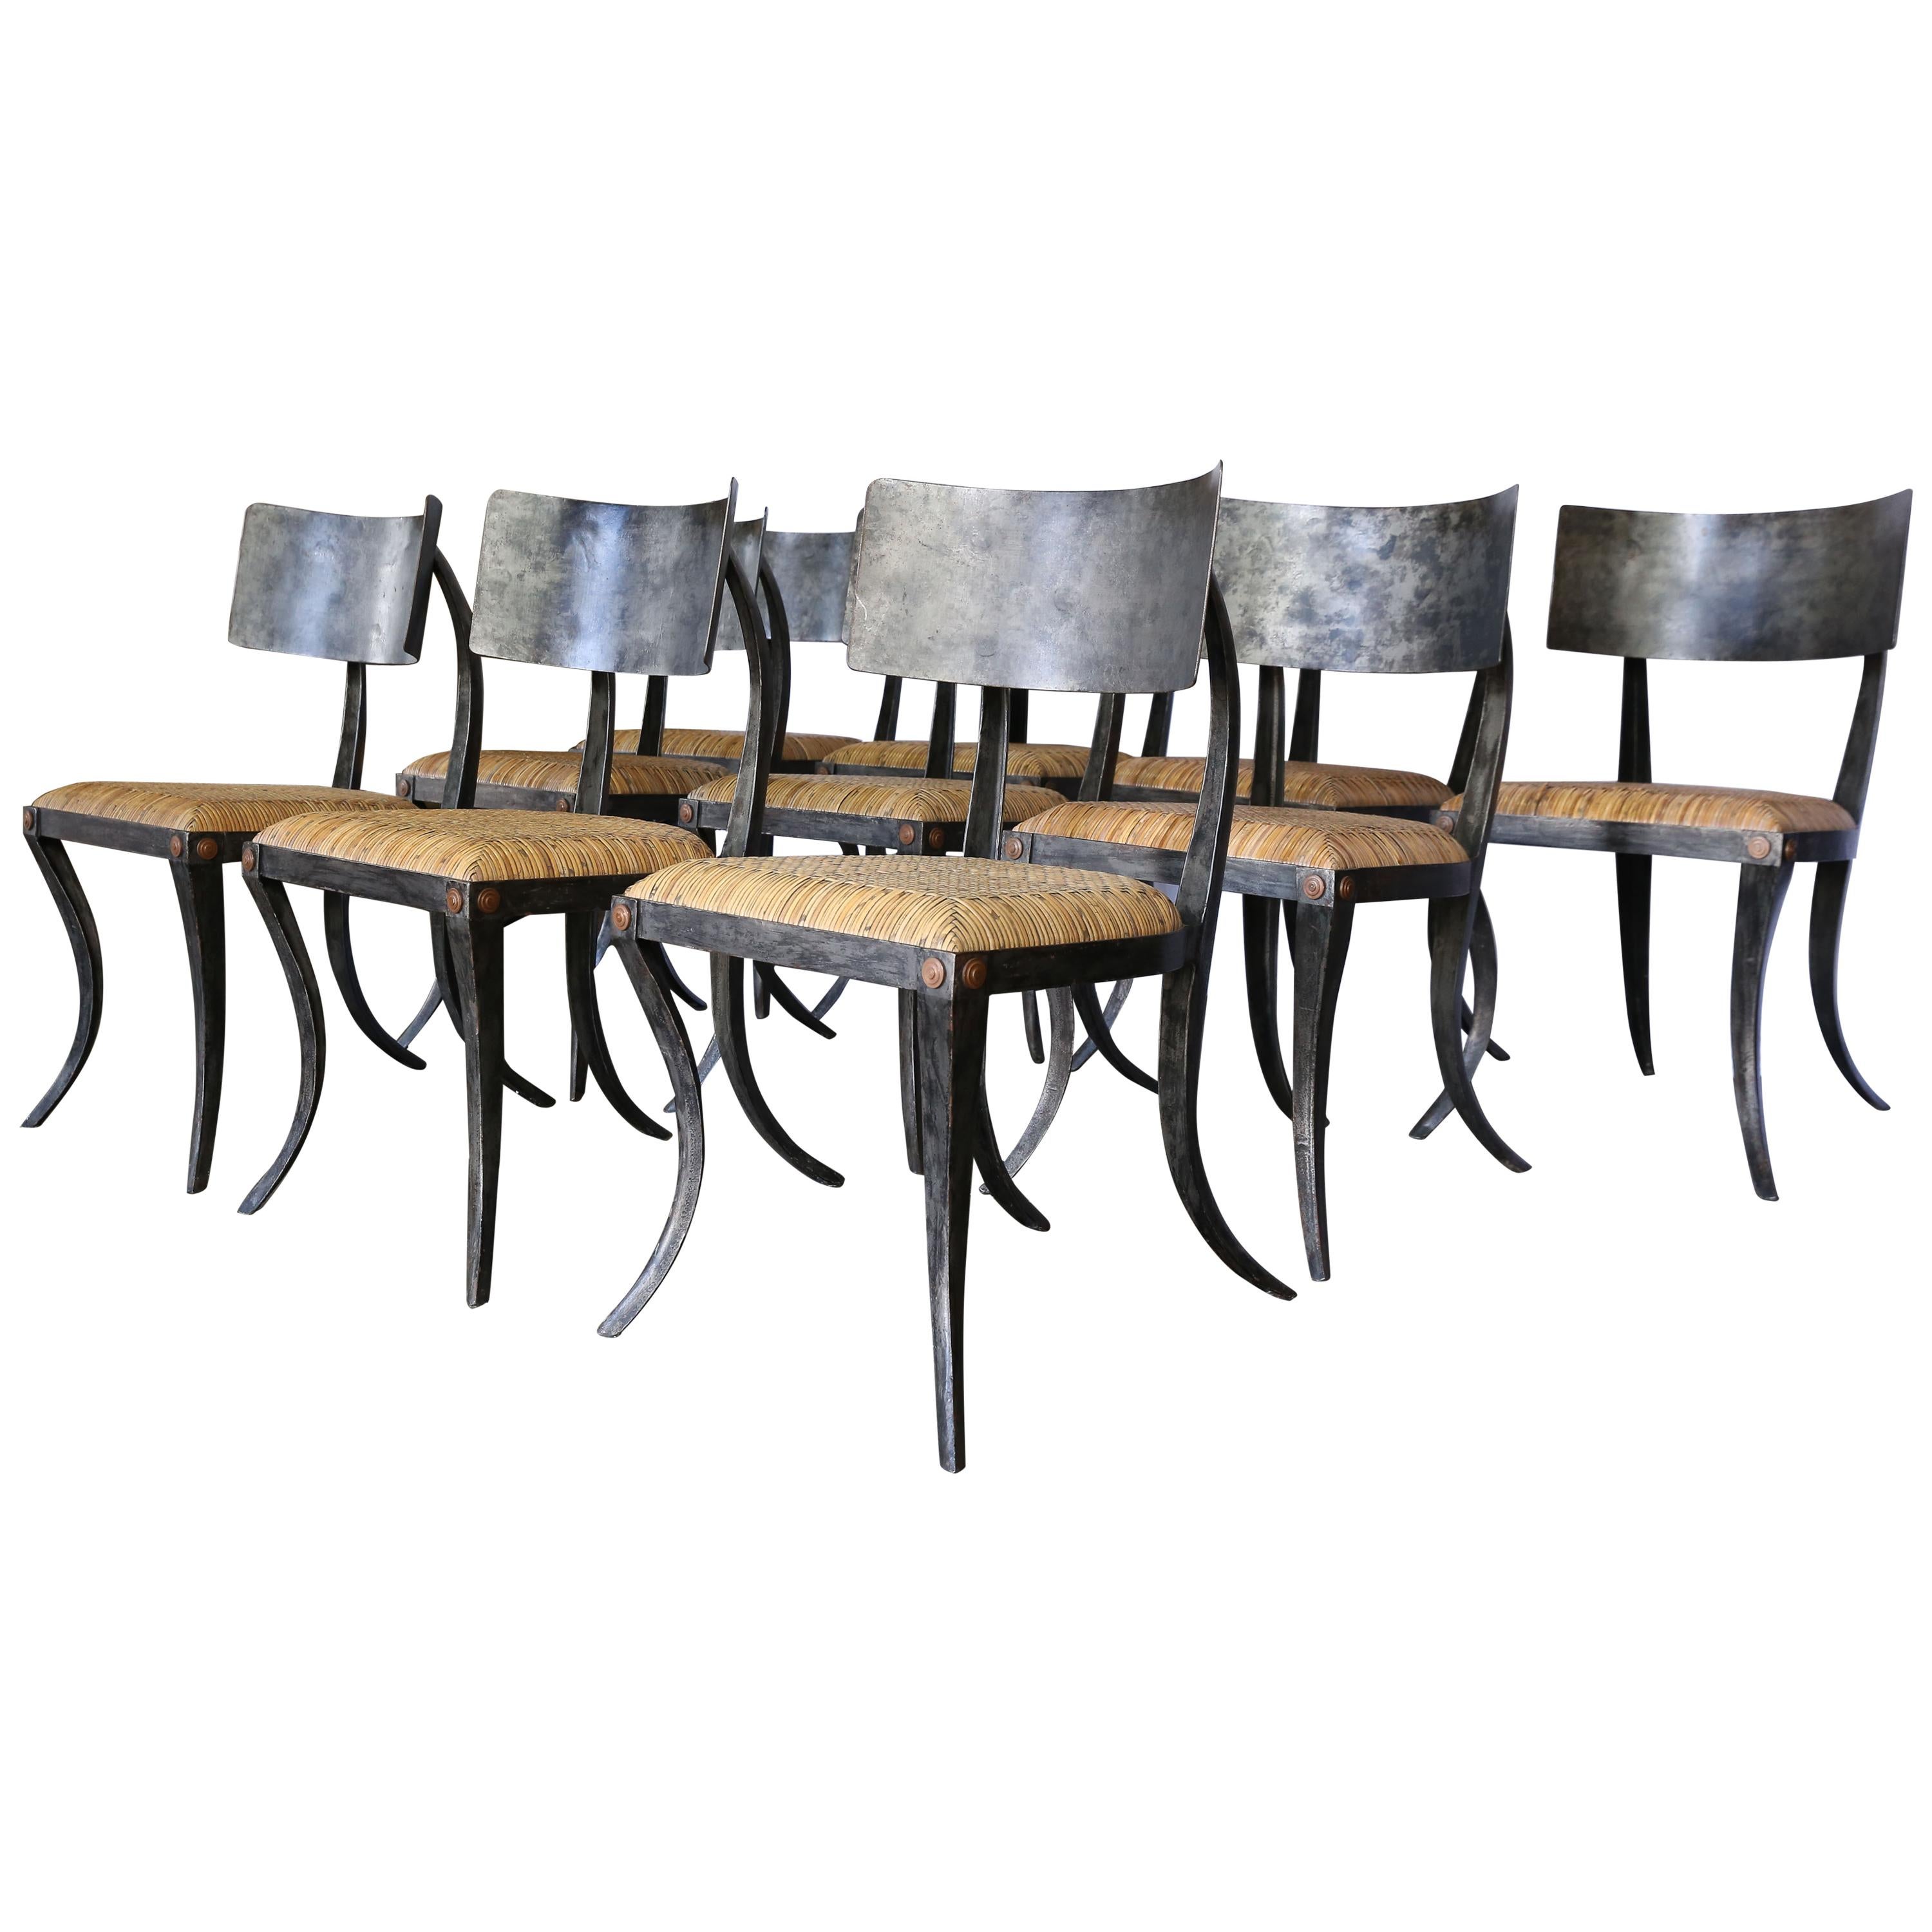 Set of 10 Metal Klismos Chairs by Ched Berenguer-Topacio